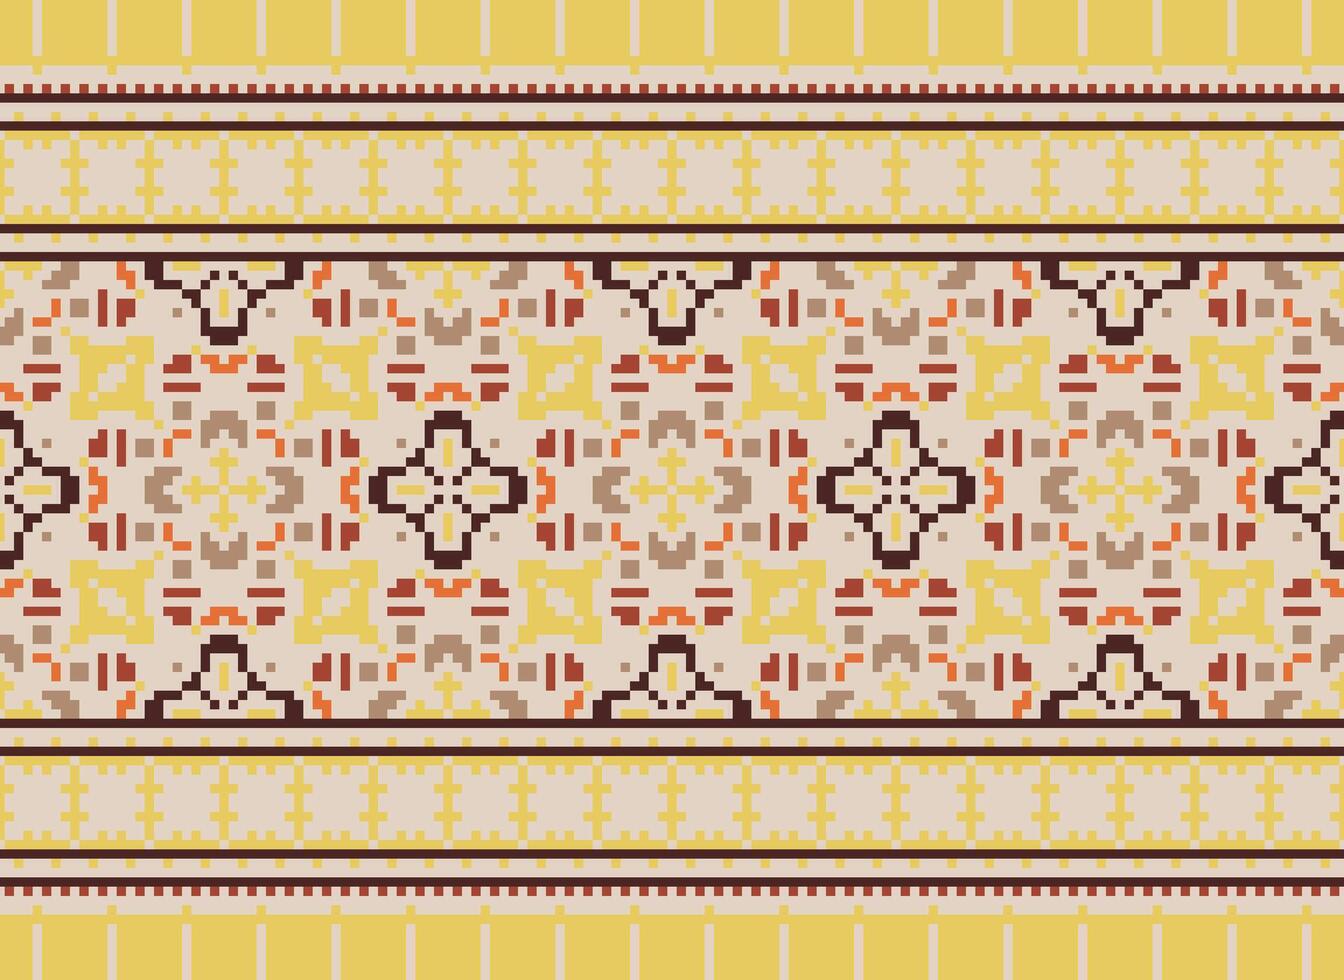 Cross Stitch. Pixel. Geometric ethnic oriental seamless pattern traditional background. Aztec-style abstract vector illustration. Design for textile, curtain, carpet, wallpaper, clothing, wrapping